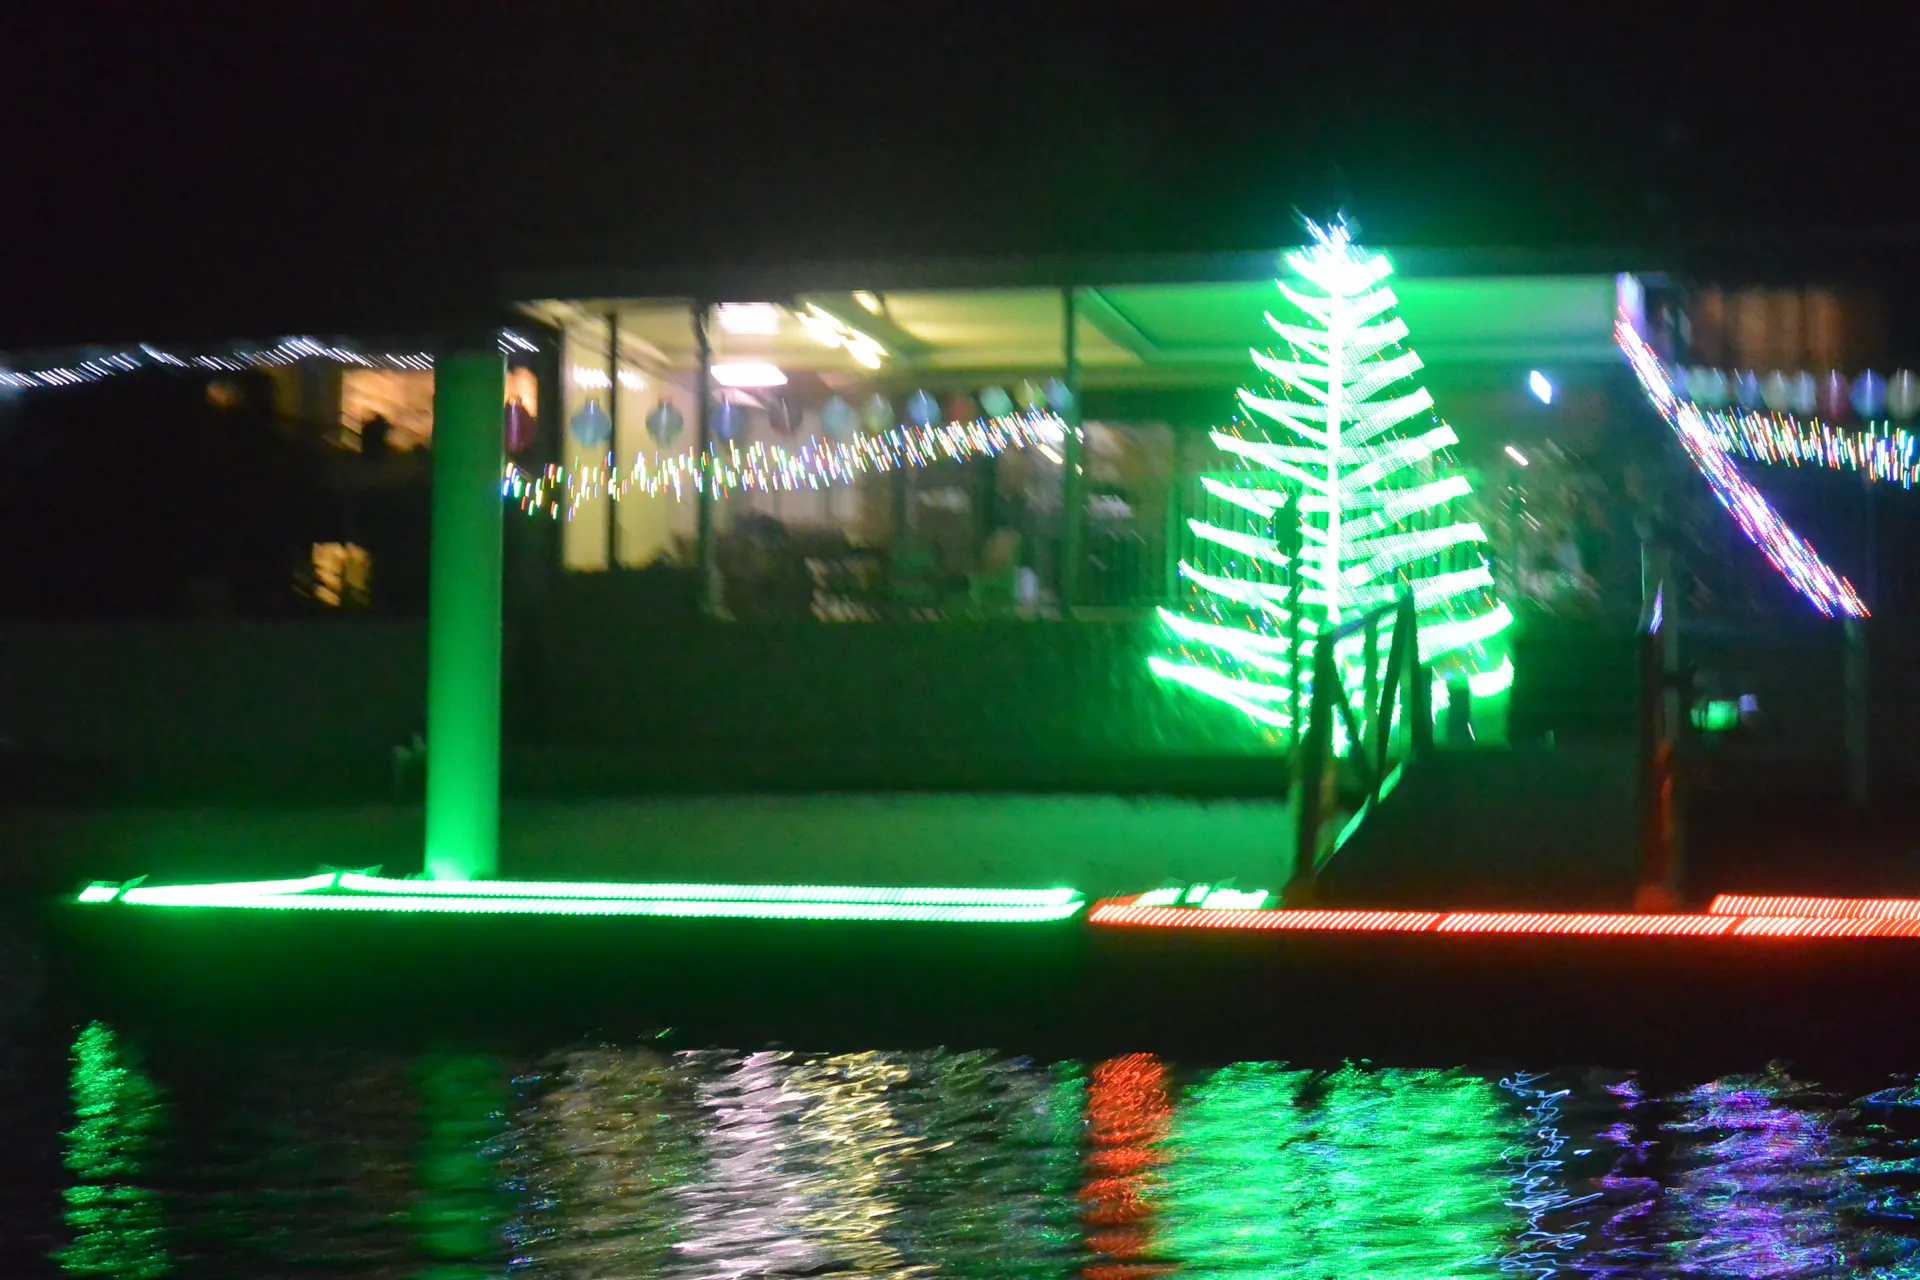 Christmas Tree light display from one of the houses along the Mooloolaba canals, Sunshine Coast